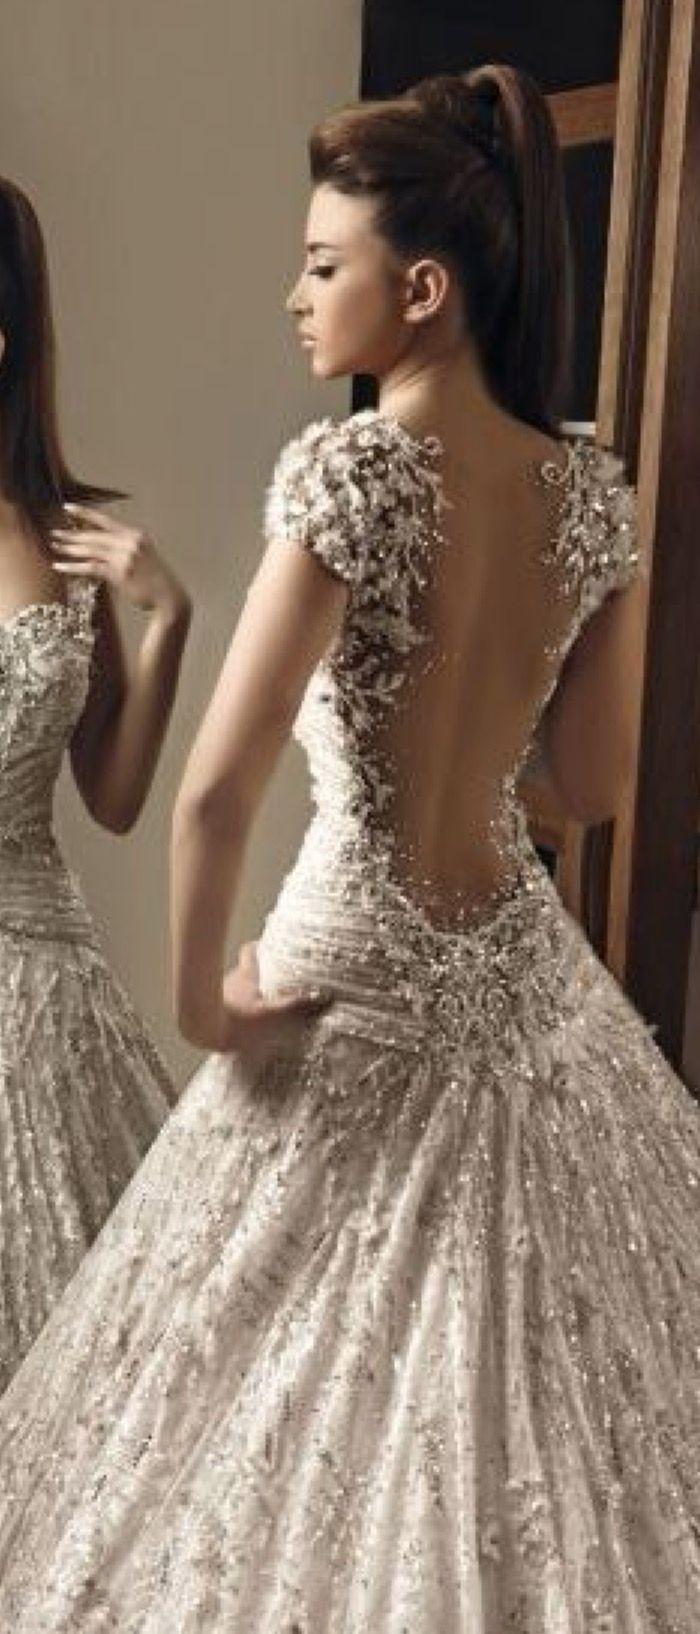 Mariage - Dresses, Dresses And More Dresses!!!